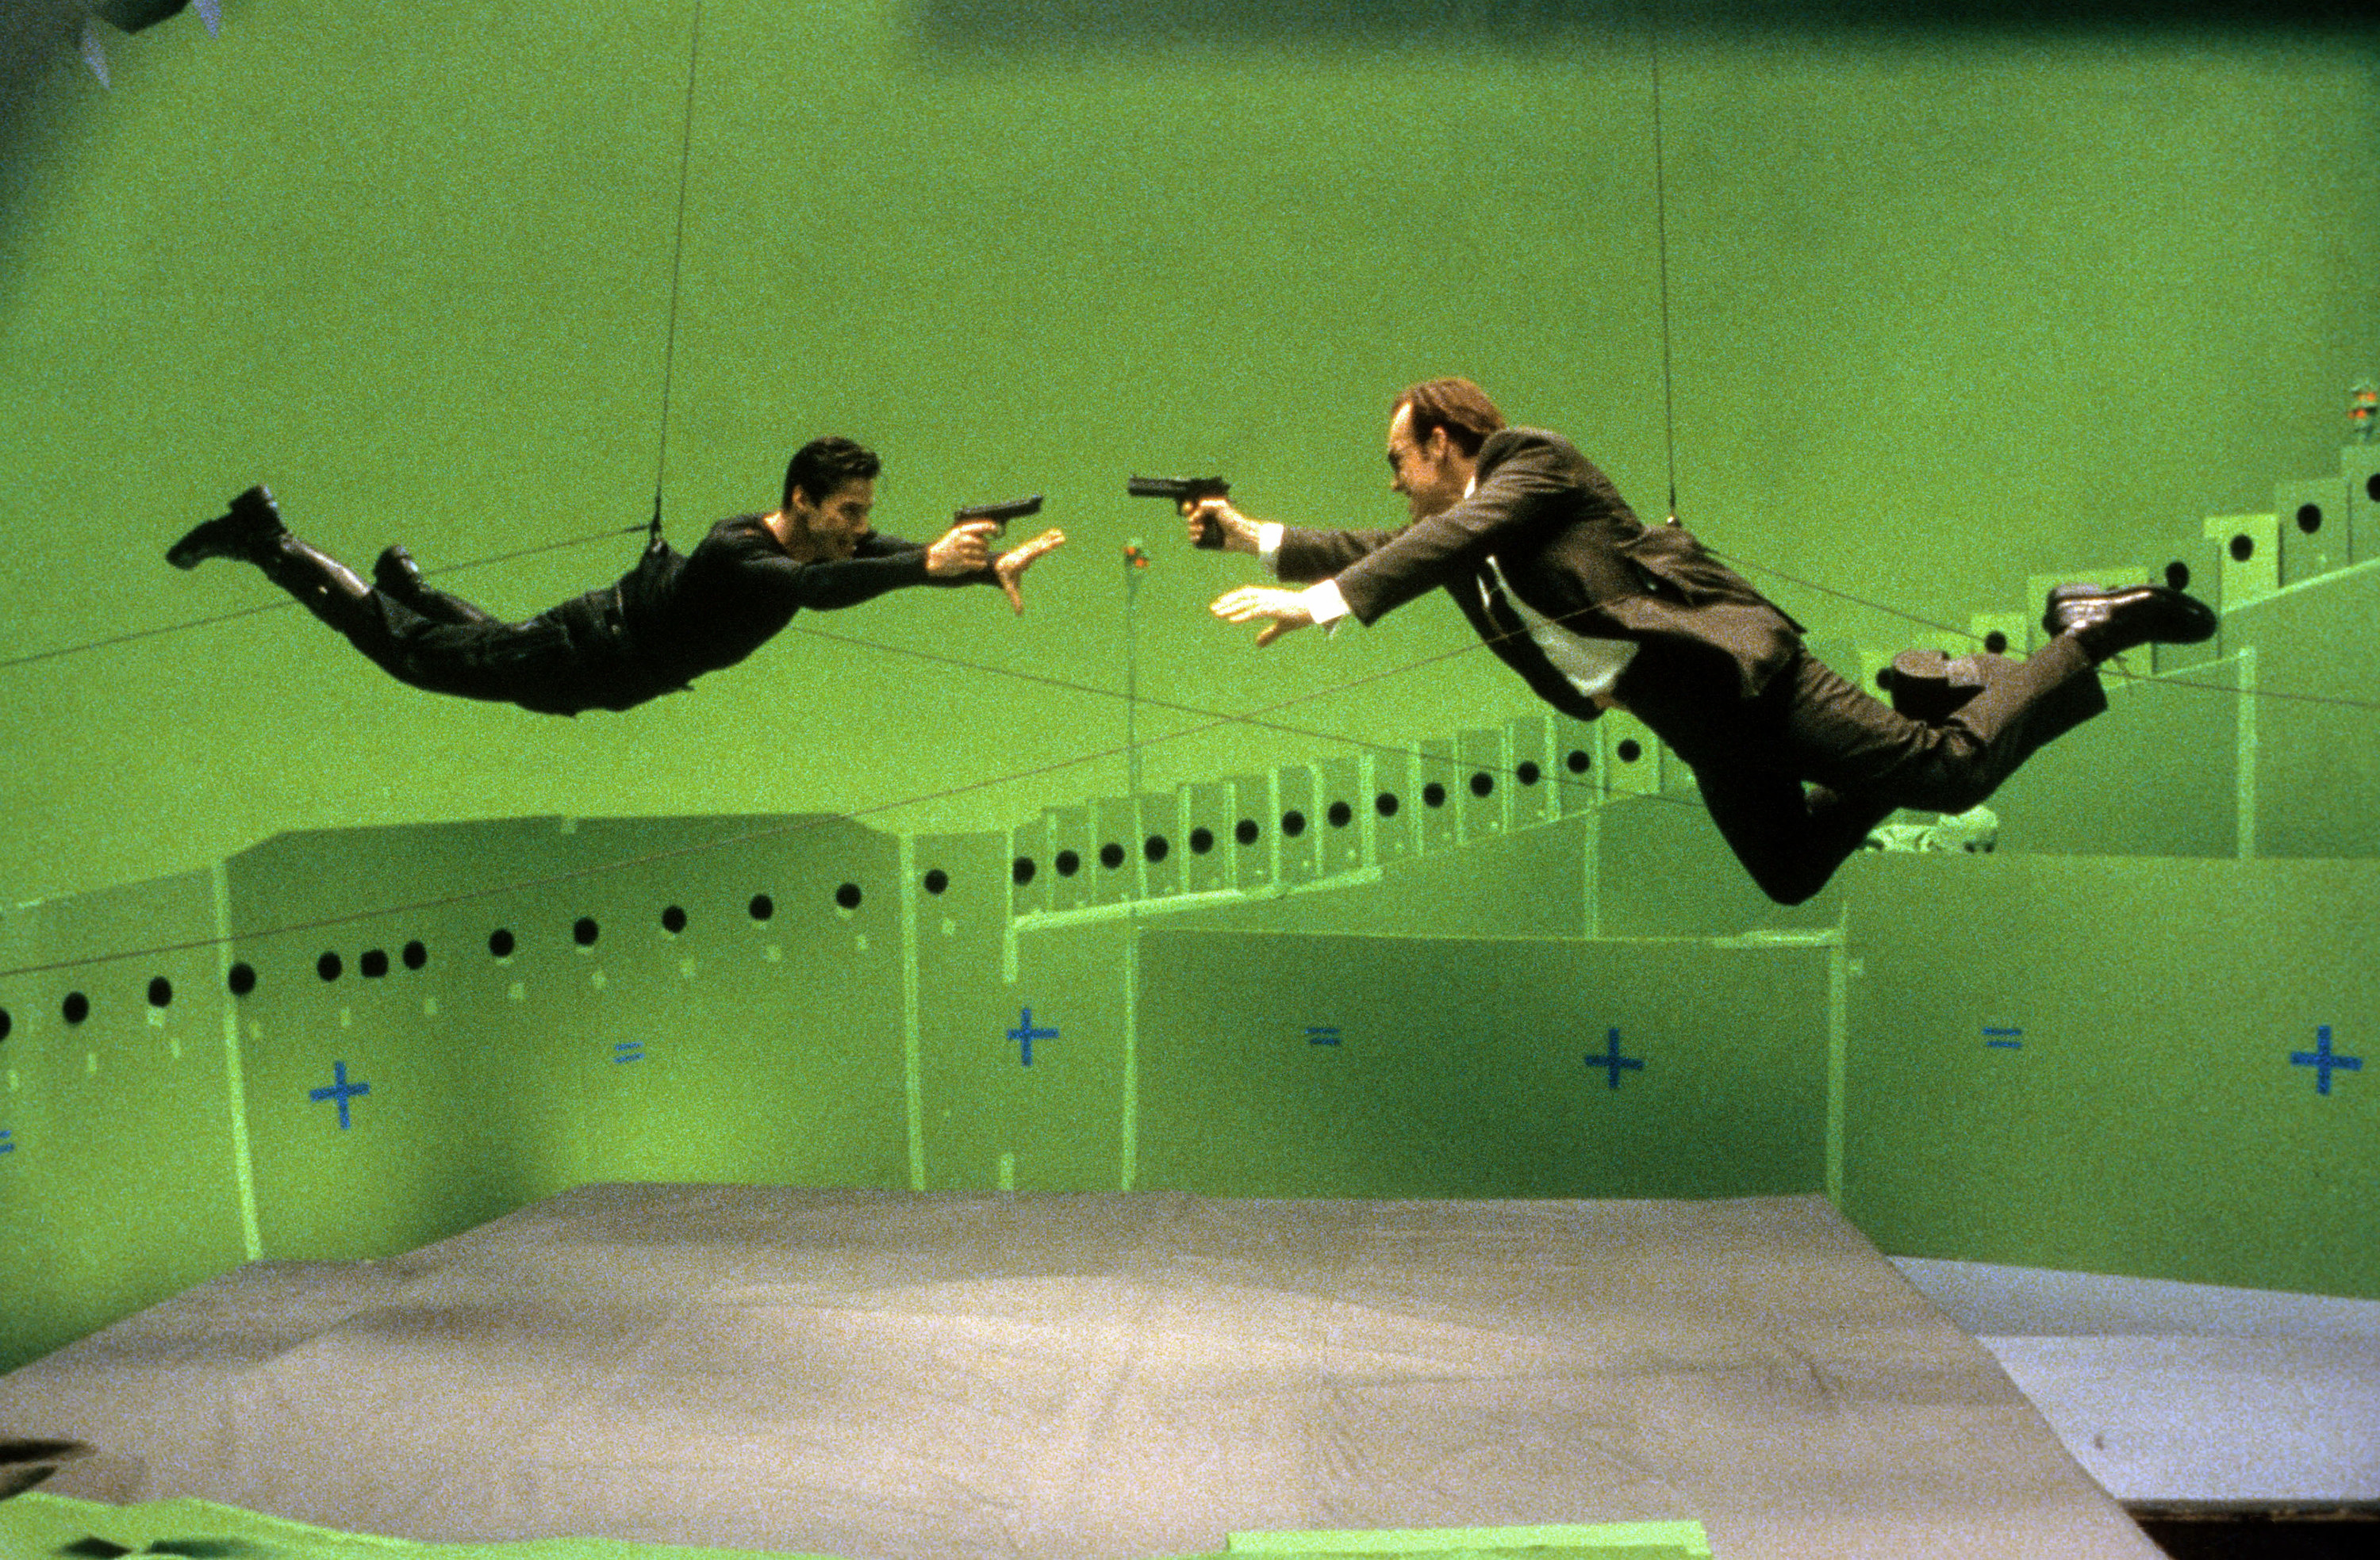 Reeves and Hugo behind-the-scenes of &quot;The Matrix&quot;